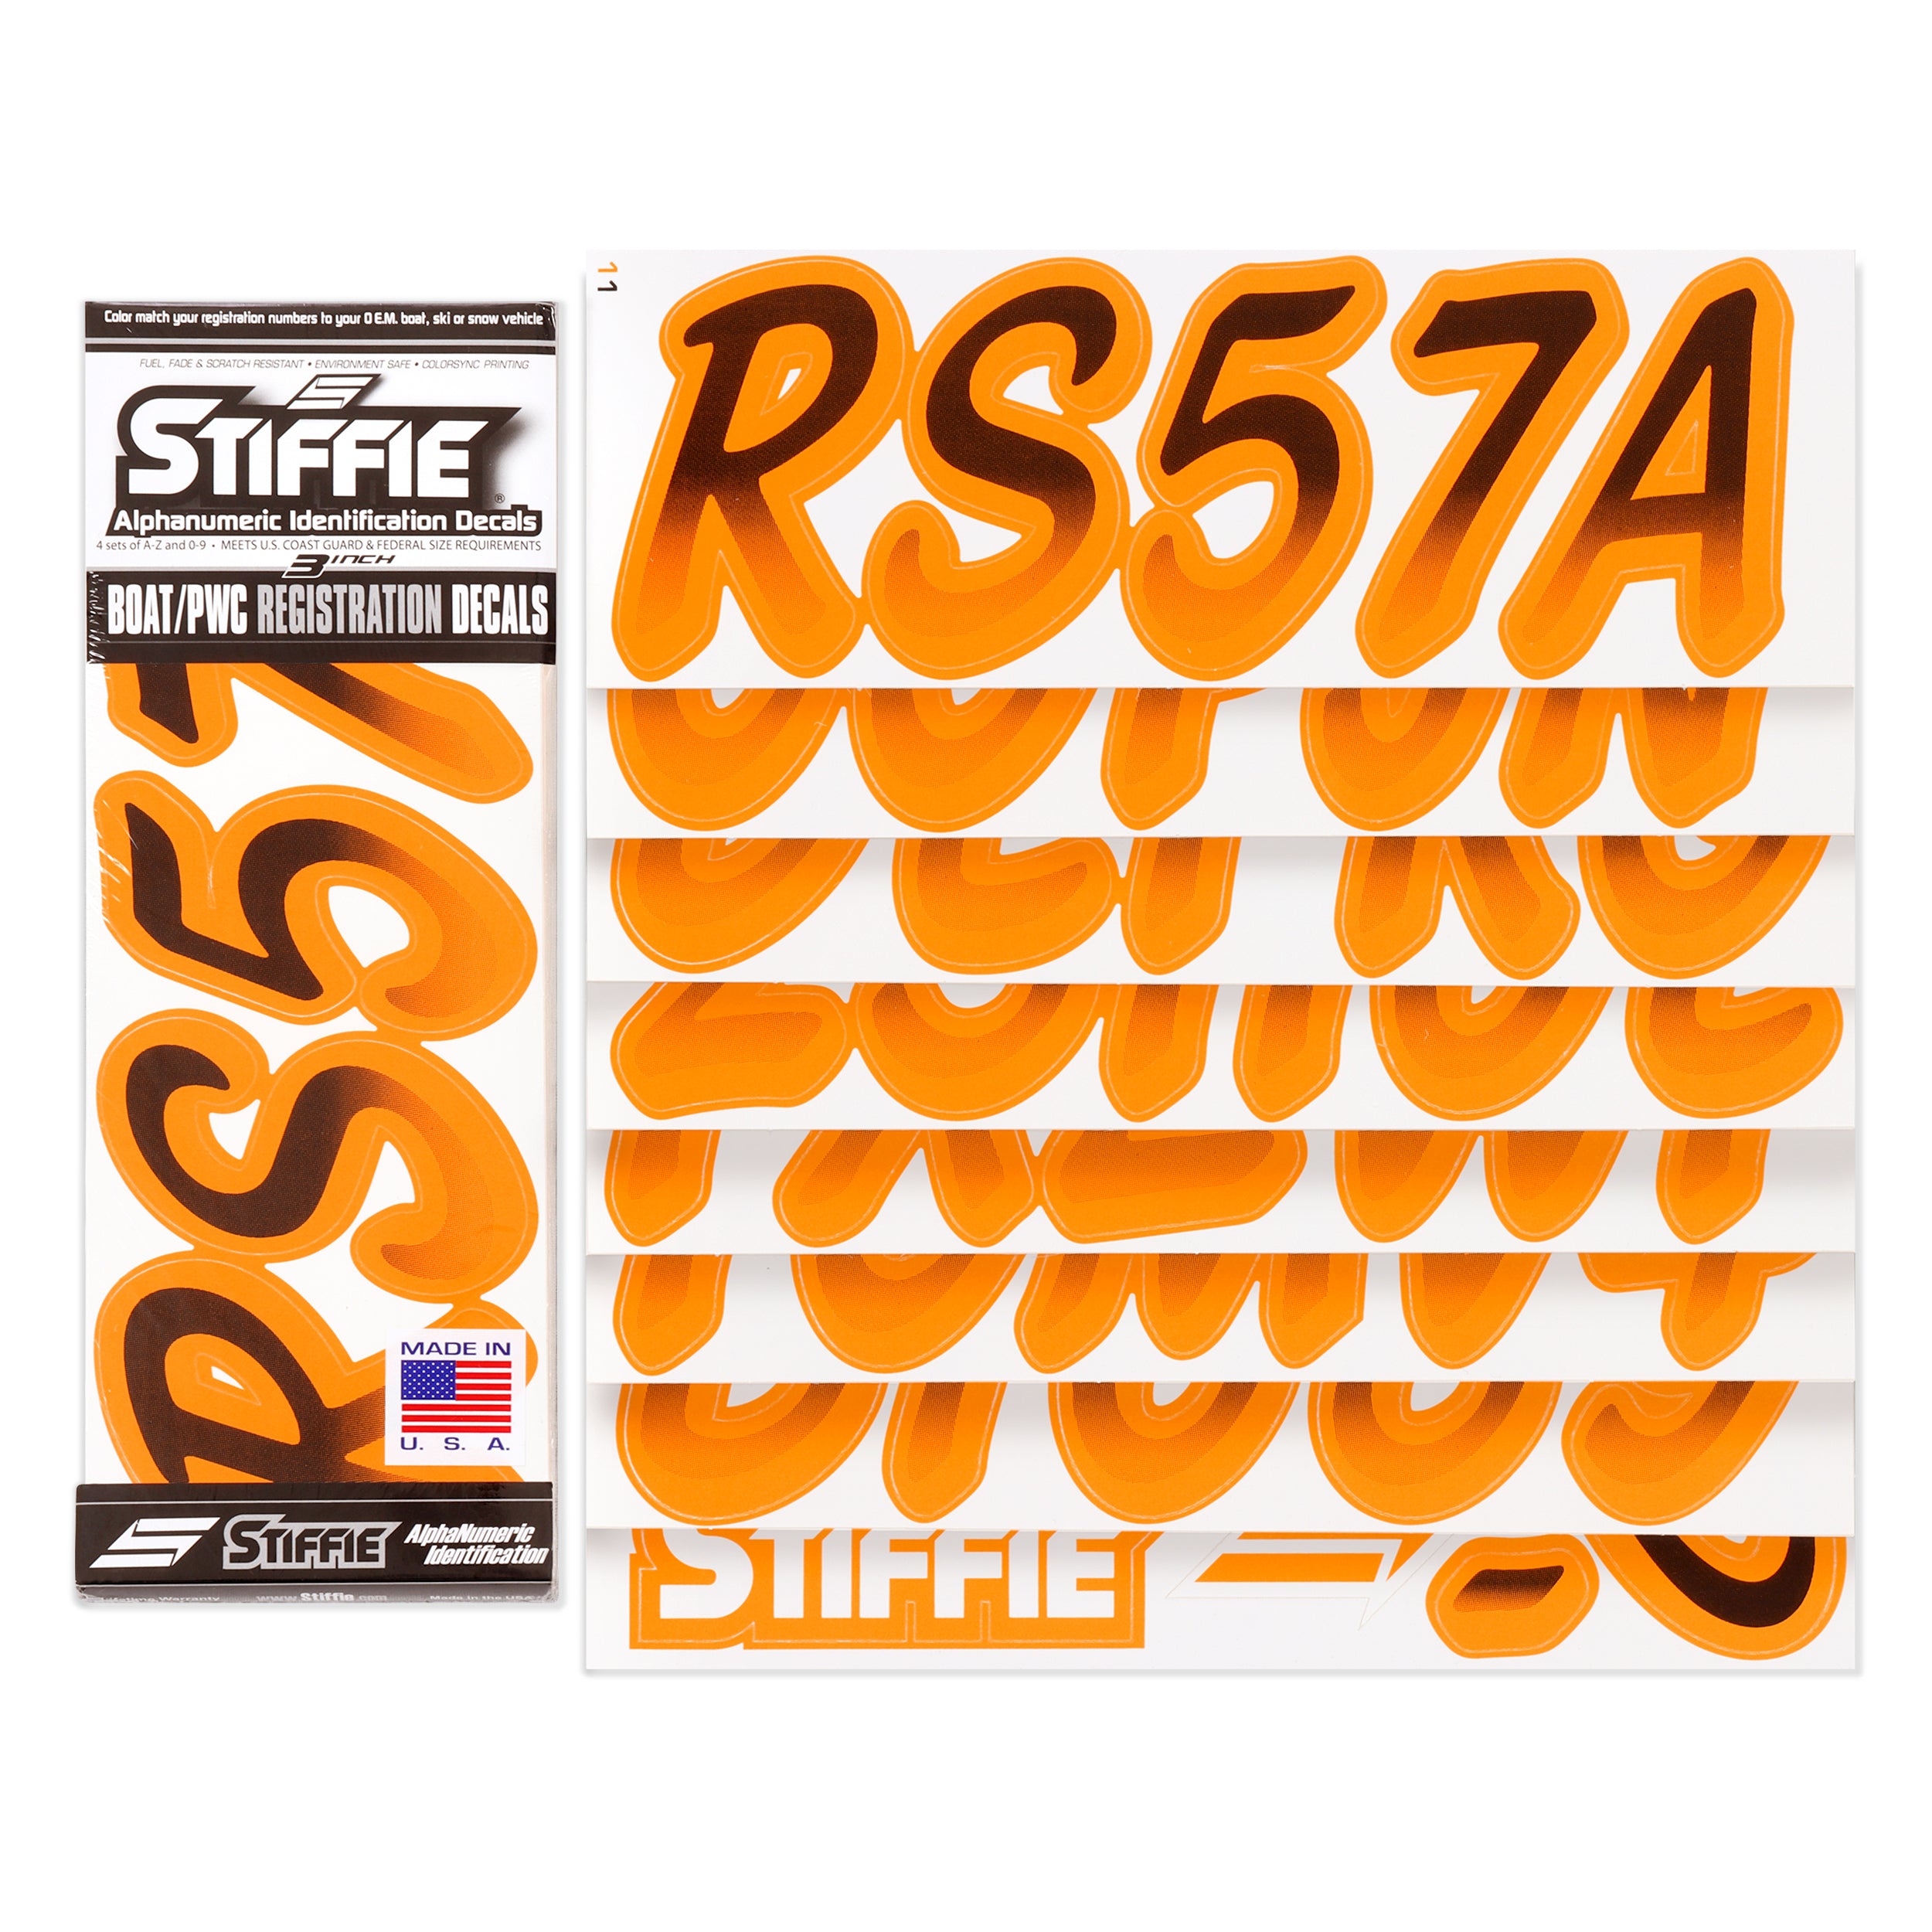 Stiffie Whipline Black/Orange Crush Super Sticky 3" Alpha Numeric Registration Identification Numbers Stickers Decals for Sea-Doo Spark, Inflatable Boats, Ribs, Hypalon/PVC, PWC and Boats.